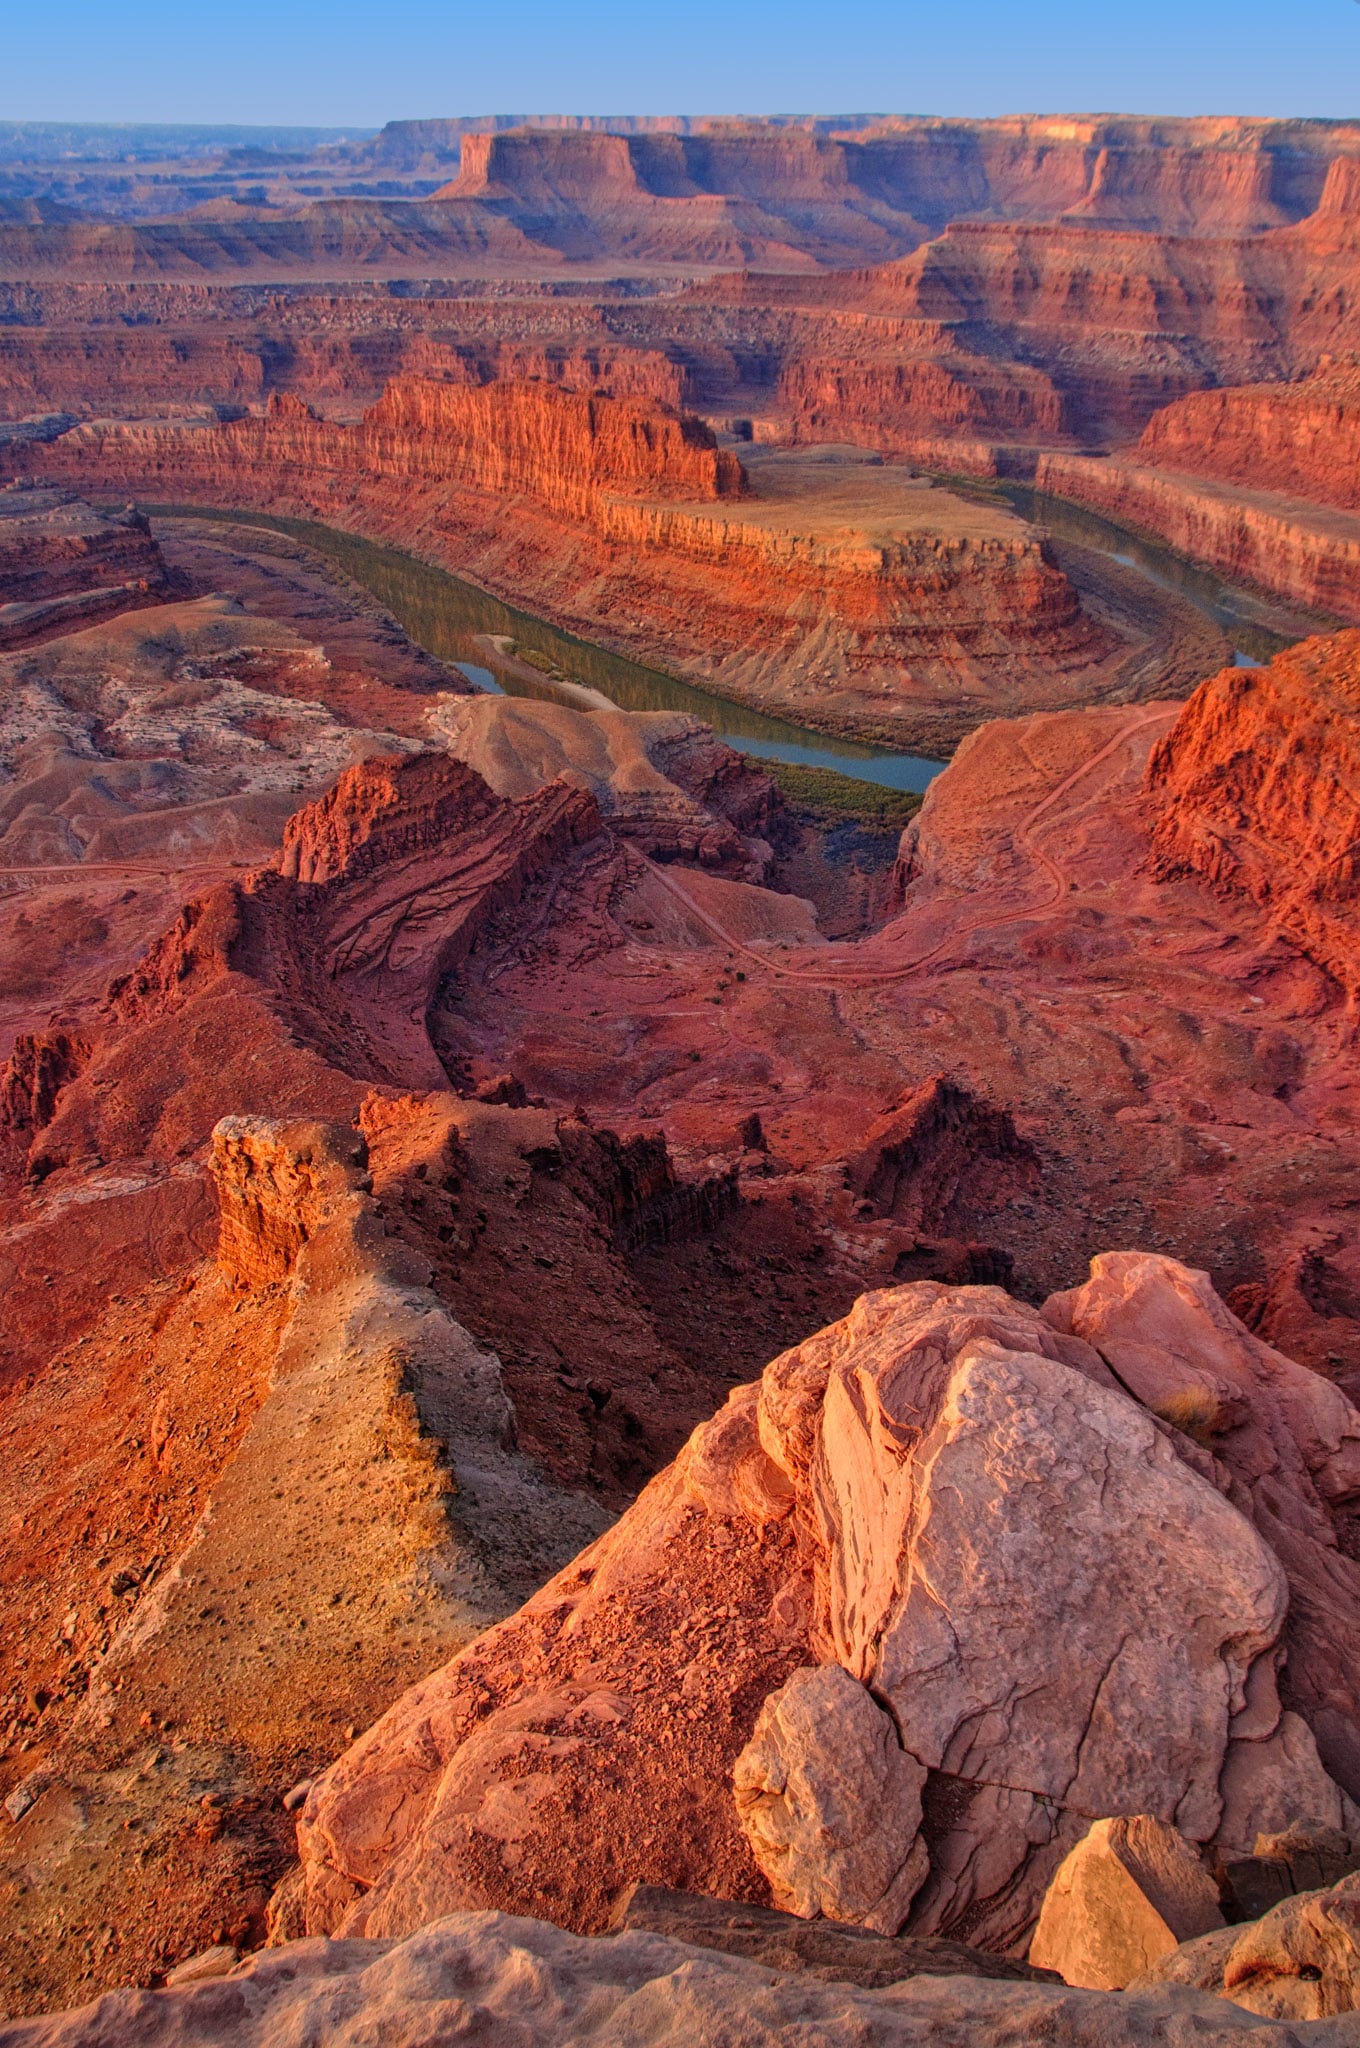 A view of the Colorado River running through Canyonlands National Park in Utah.